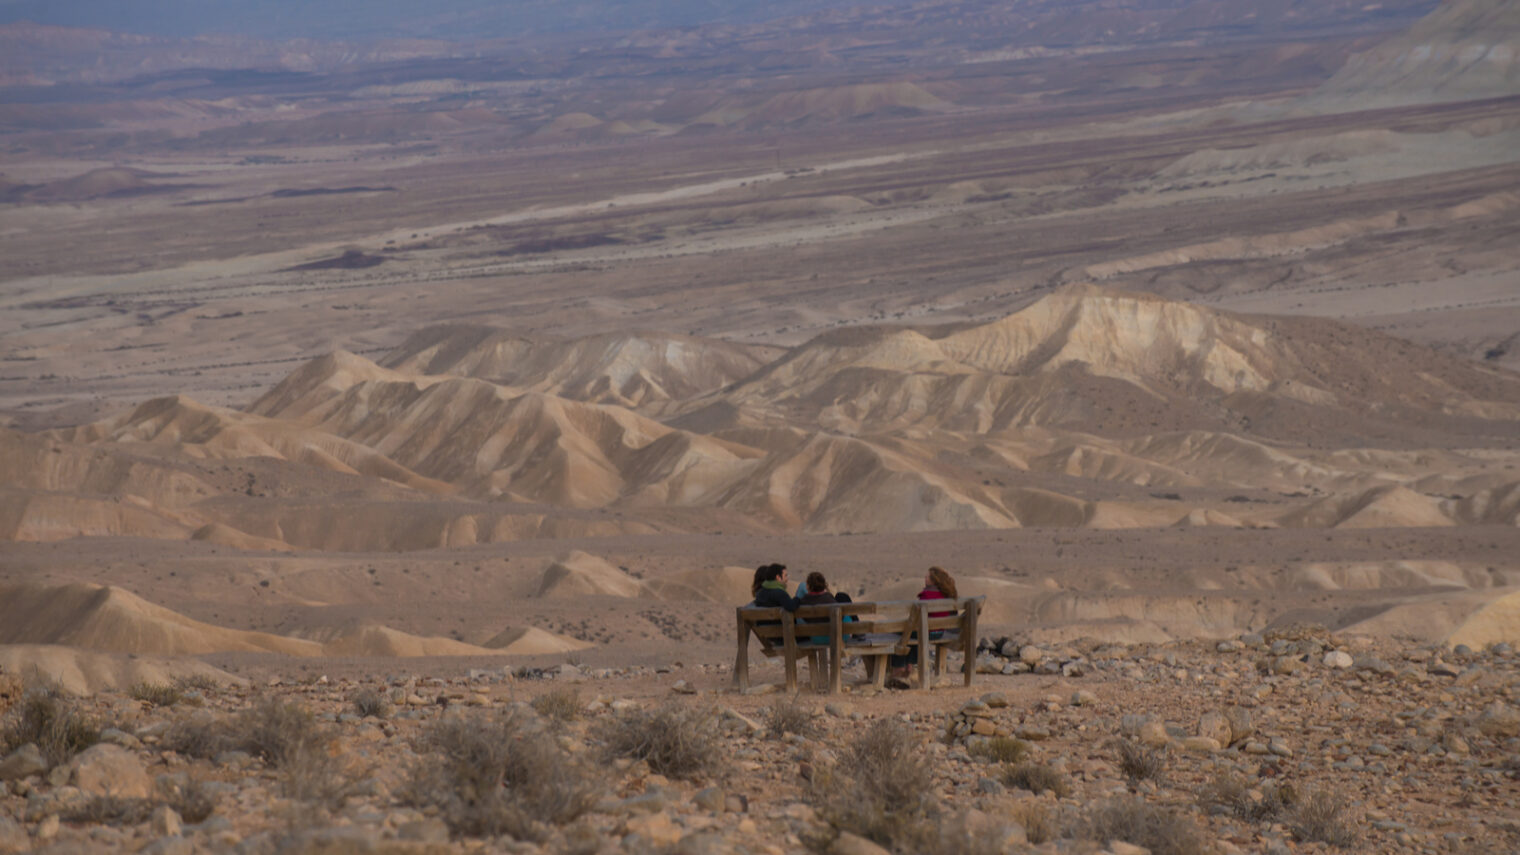 And sometimes it’s quiet and calm. Desert visitors admiring the view over the Negev. Photo by Dani Machlis/Ben-Gurion University of the Negev